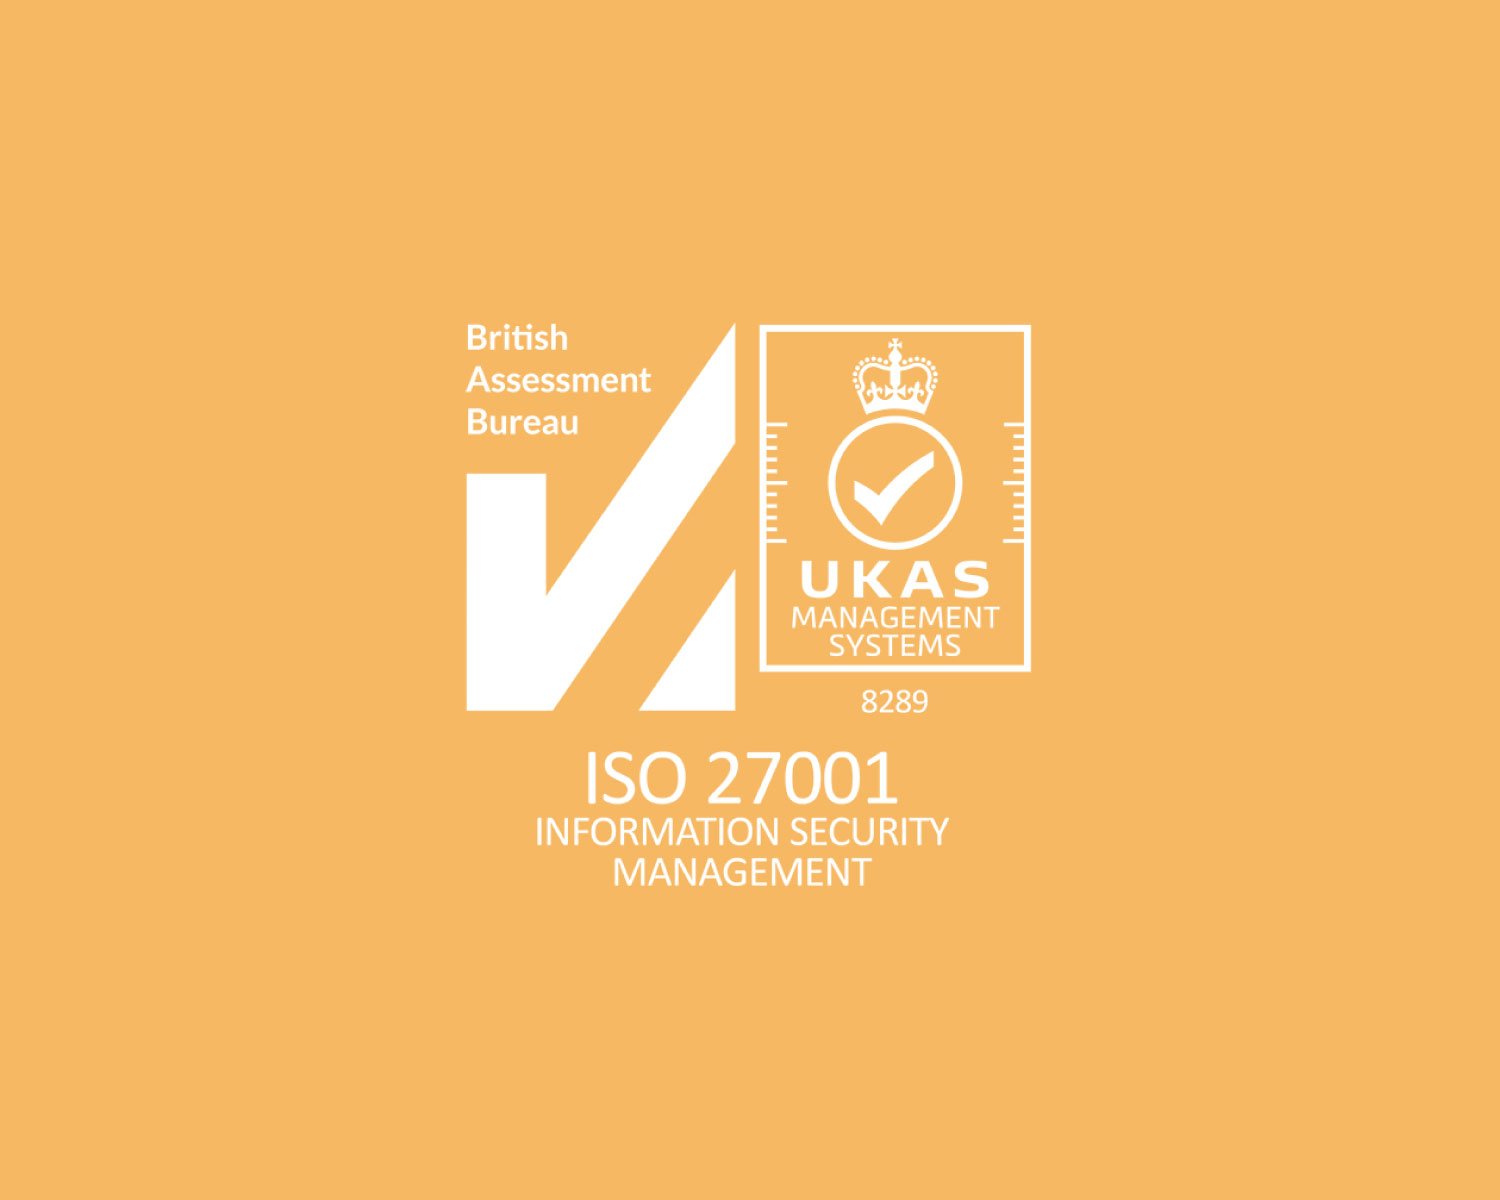 ISO 27001 Certified for Third Consecutive Year